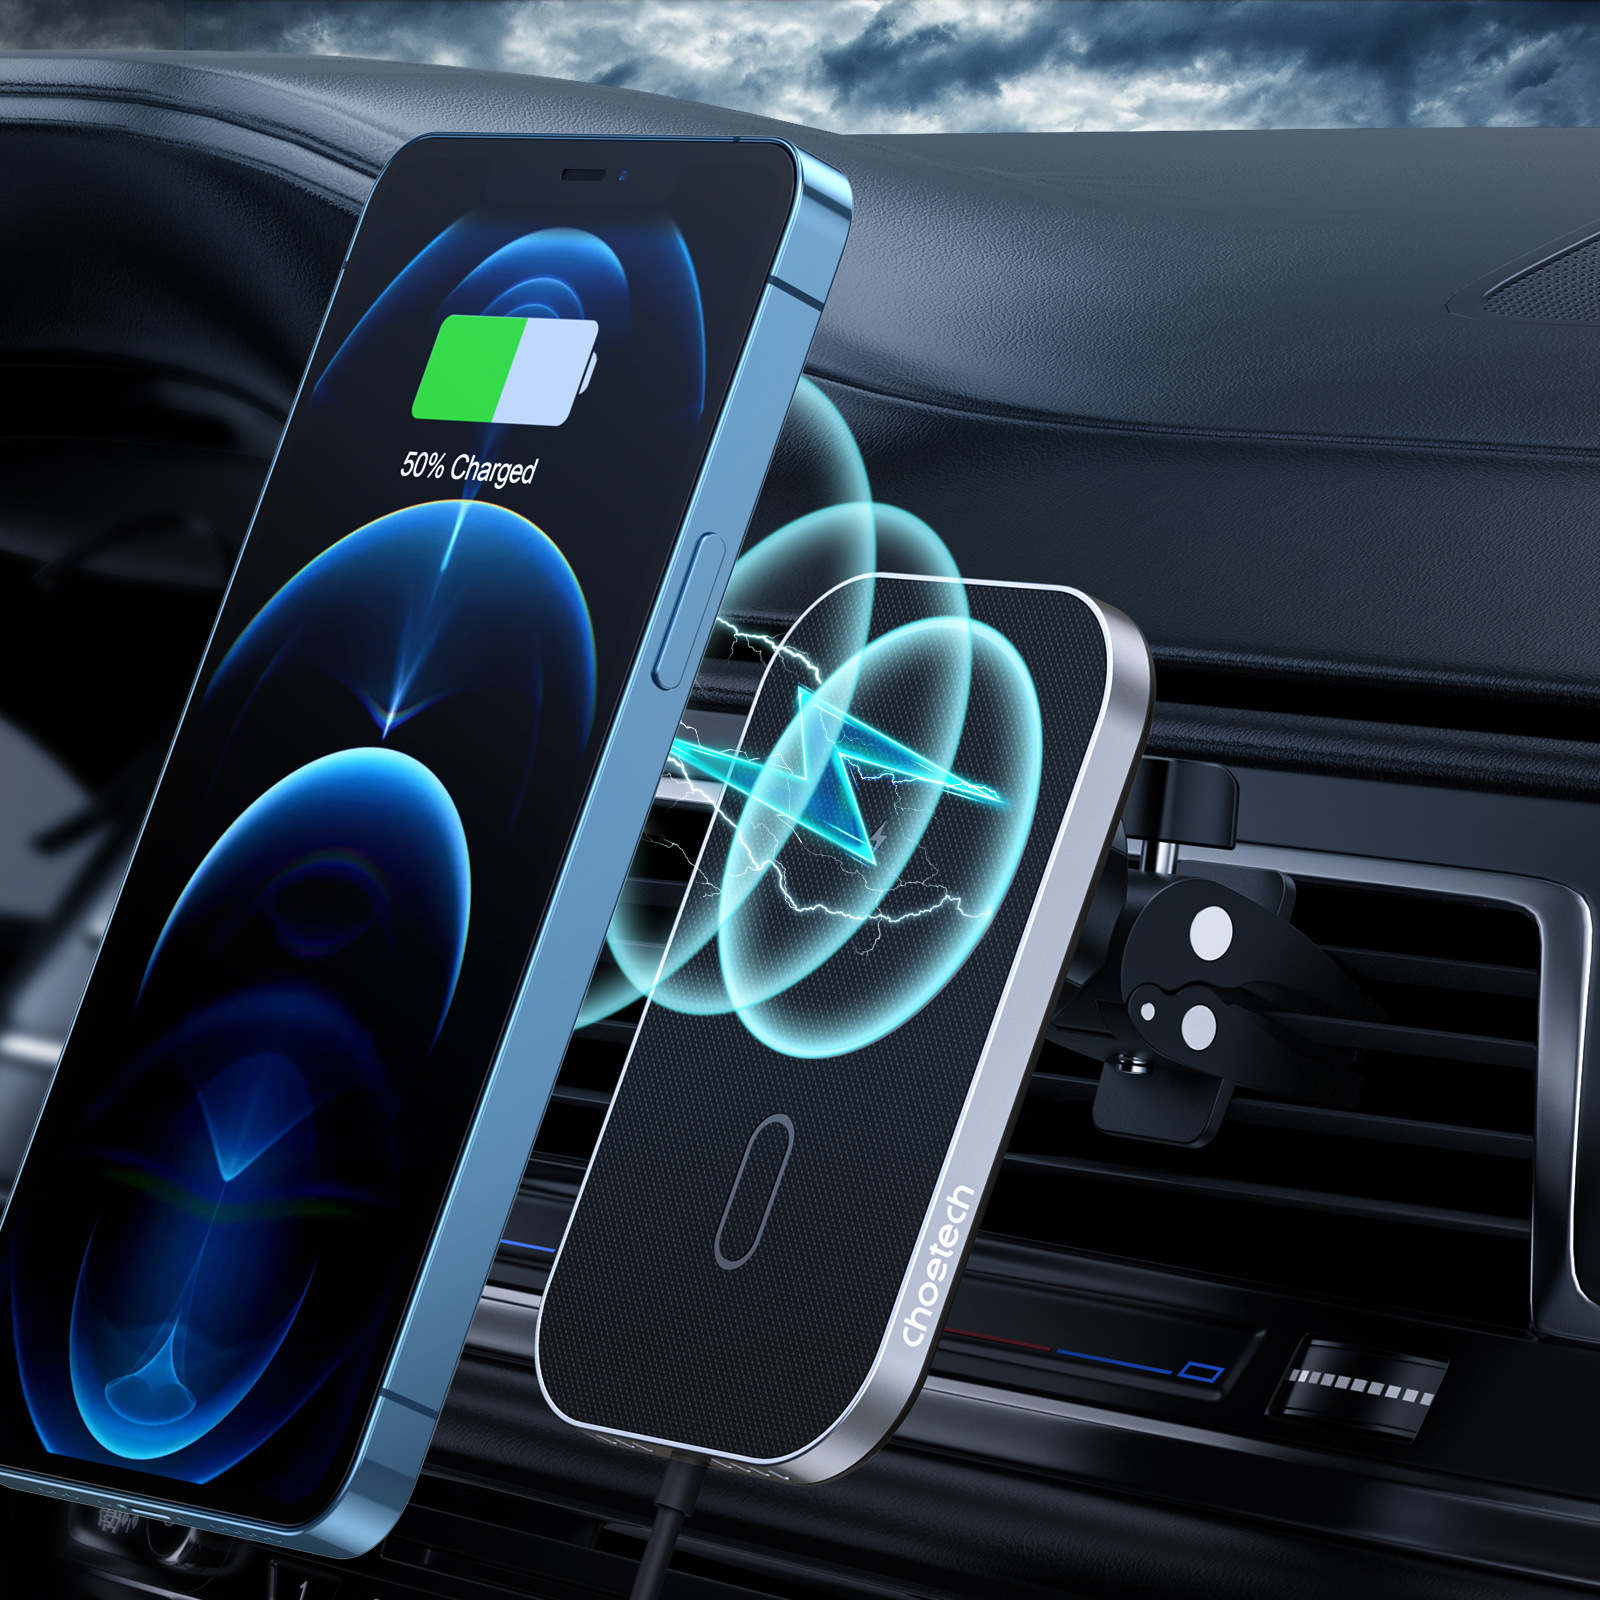 CHOETECH 15W Magnetic Air Vent Wireless Car Charger Mount for iPhone 12 Pro Max for iPhone 12 Pro for iPhone 12 Mini for Samsung Galaxy S21 Note S20 ultra Huawei Mate40 P50 OnePlus 9 Pro